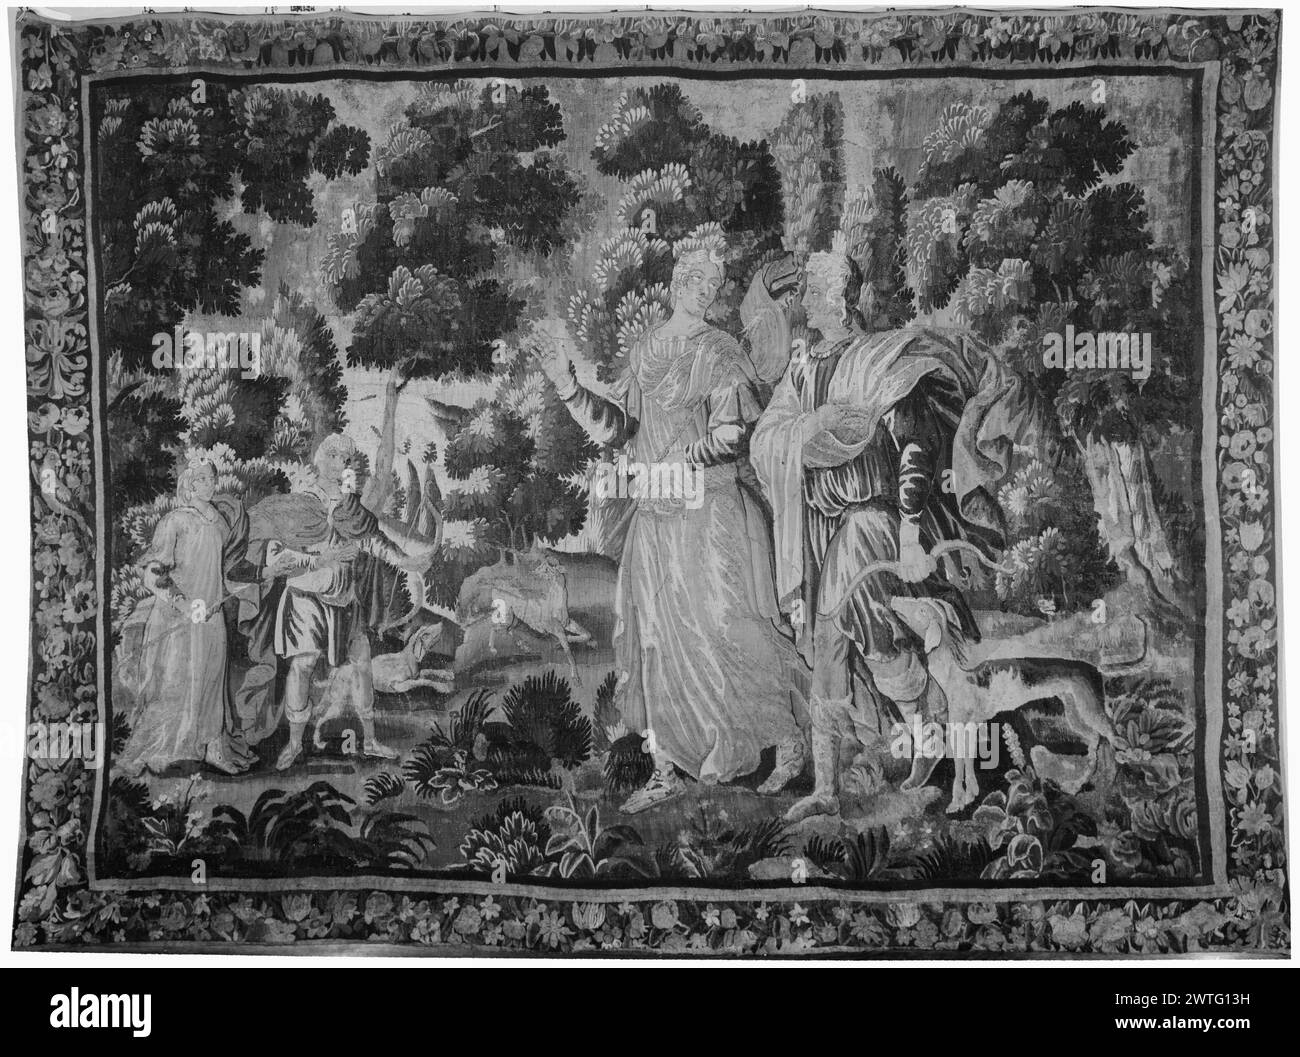 Diana and Apollo hunting deer. unknown c. 1680-1700 Tapestry Dimensions: H 8'4' x W 11'5' Tapestry Materials/Techniques: unknown Culture: French Weaving Center: Aubusson Ownership History: French & Co. received from Mrs. J. Larus, 8/6/1952; returned 4/23/1954. In landscape with trees & flowering plants, Diana & Apollo standing with arrow & bow, near dog in foreground; additional couple with similar weapons in background (L) near dog running after deer (BRD) floral garland (L BRD) inhabited by bird & with acanthus leaves French & Co. stock sheet in archive, 52489-x Stock Photo